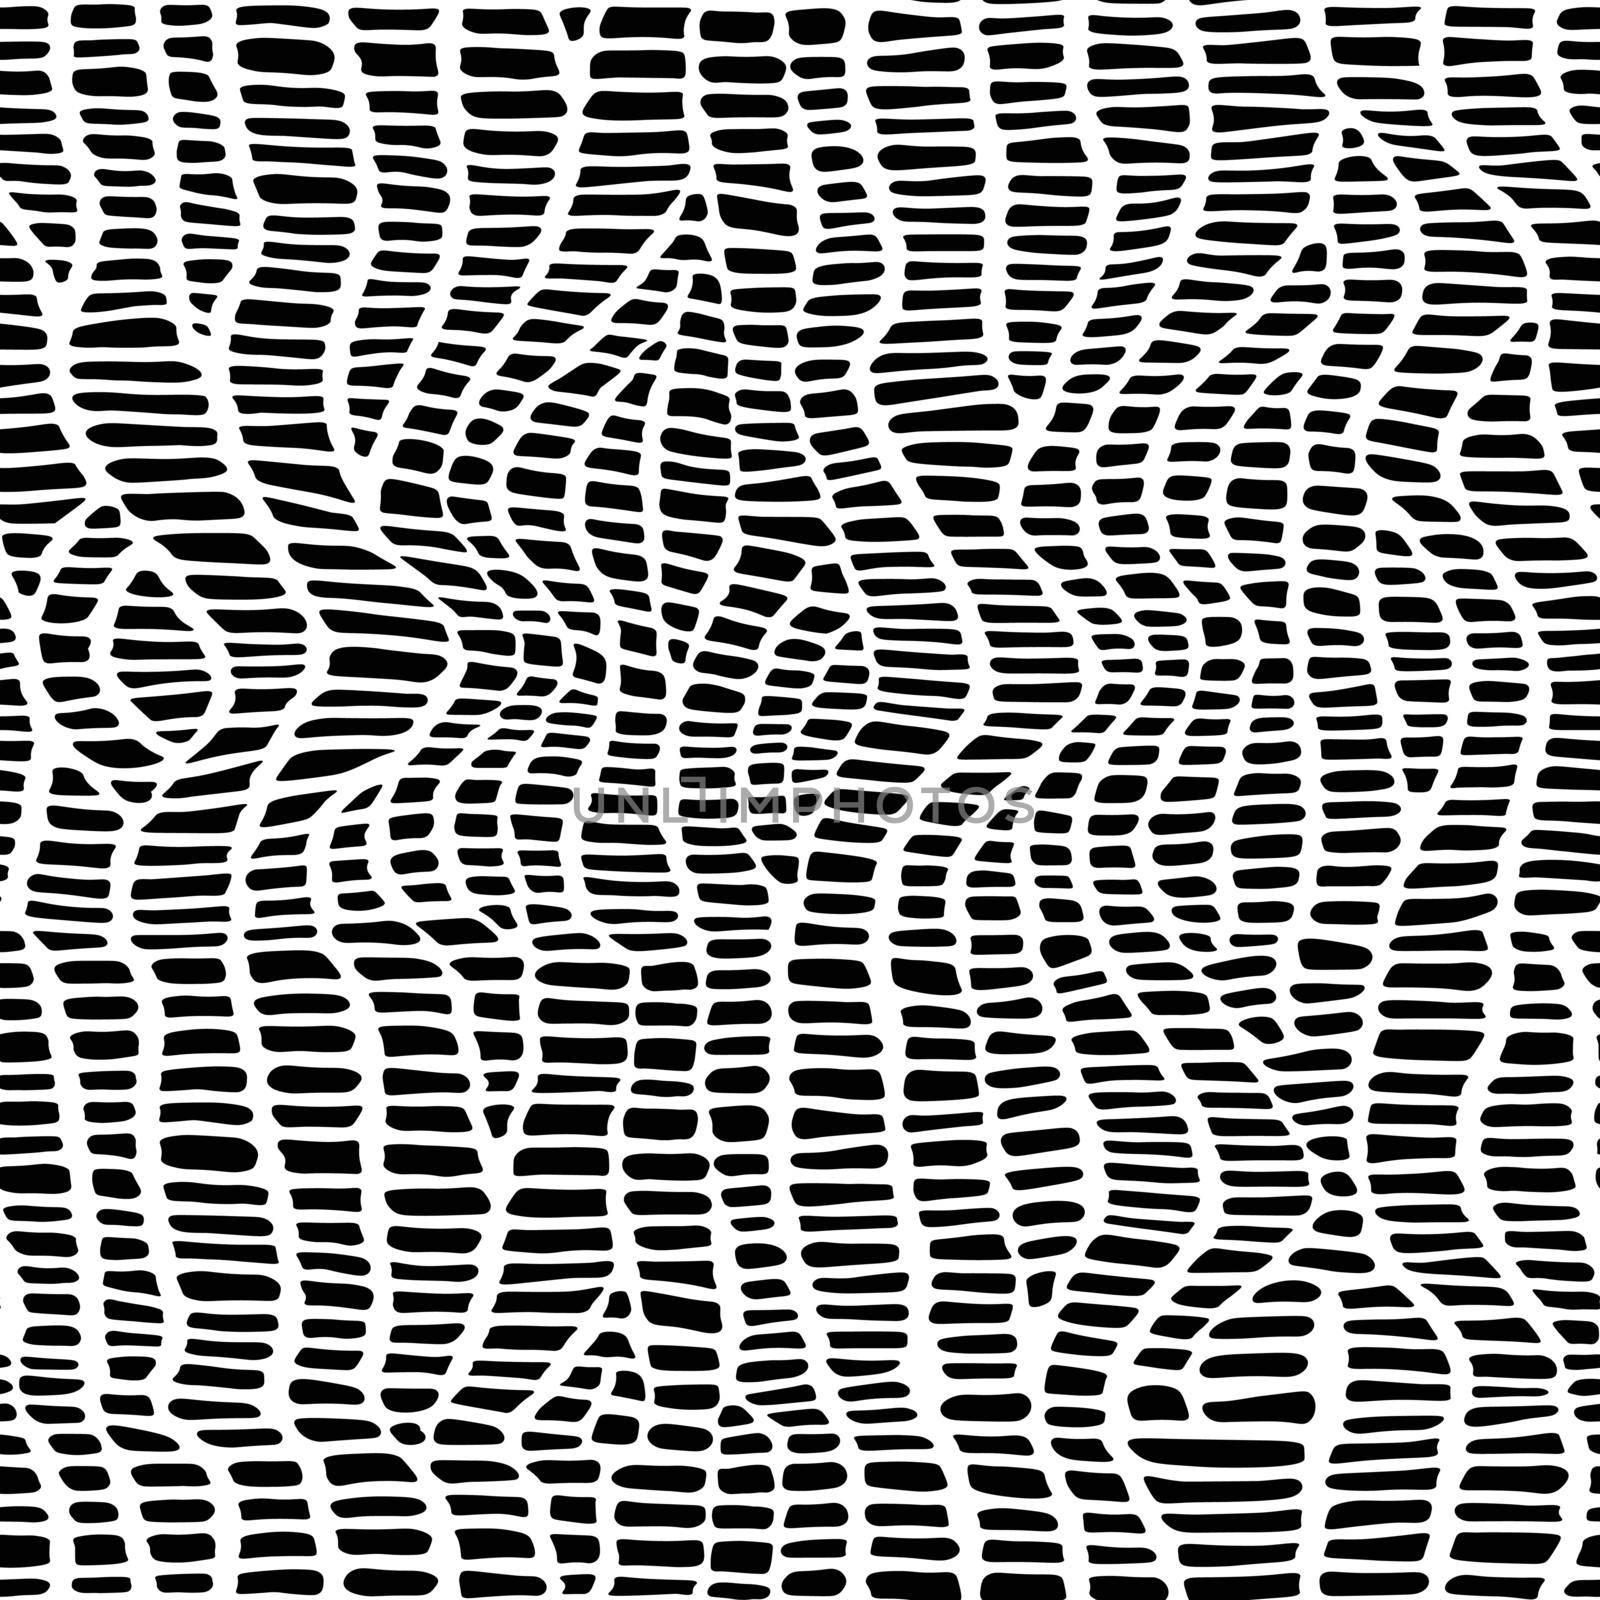 Abstract modern crocodile leather seamless pattern. Animals trendy background. Black and white decorative vector illustration for print, fabric, textile. Modern ornament of stylized alligator skin by allaku